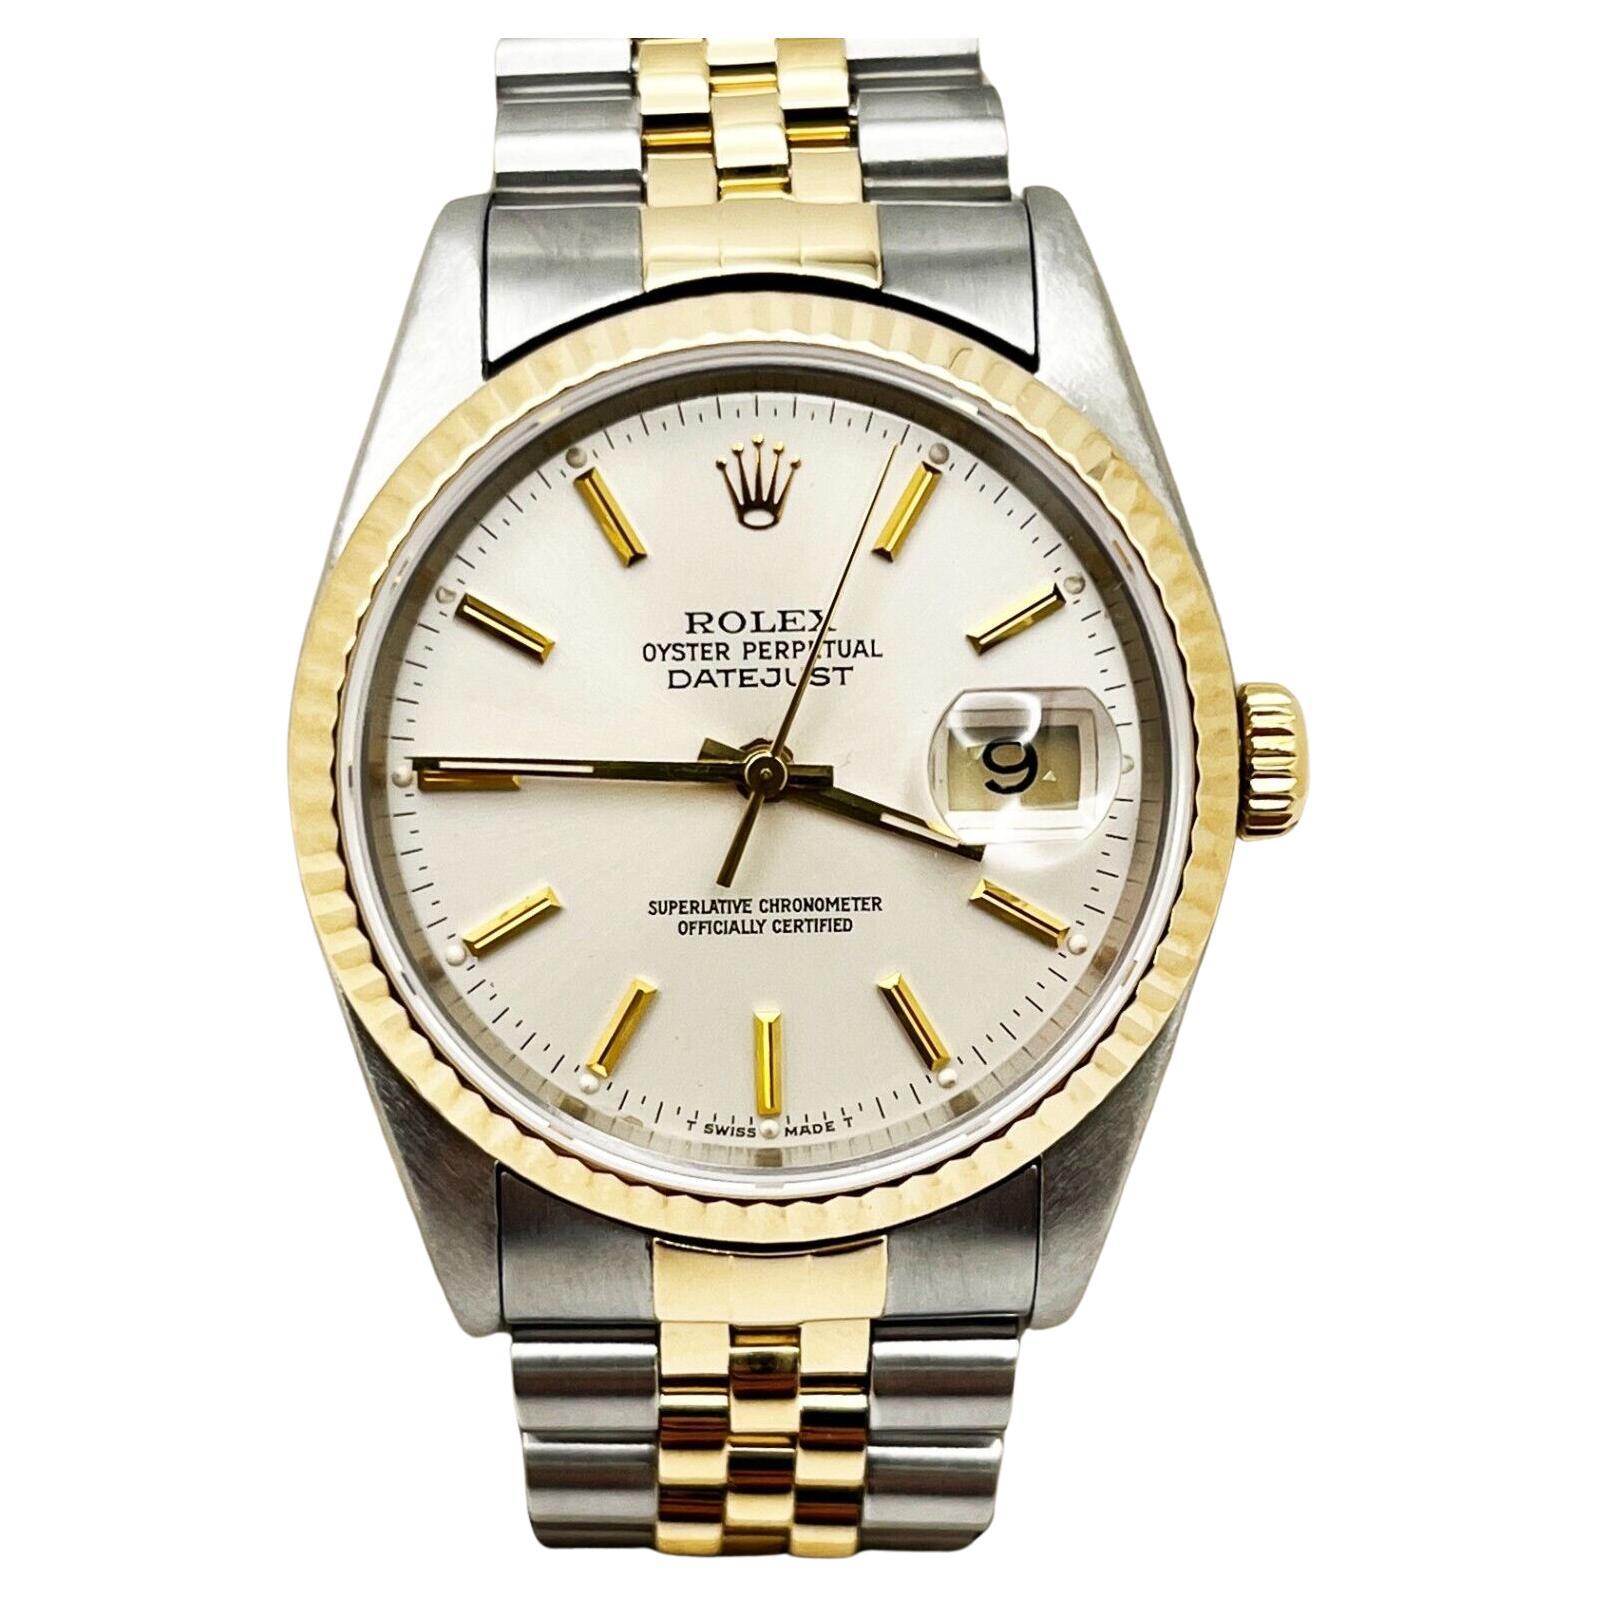 Rolex 16233 Datejust Silver Dial 18K Gold and Stainless Steel